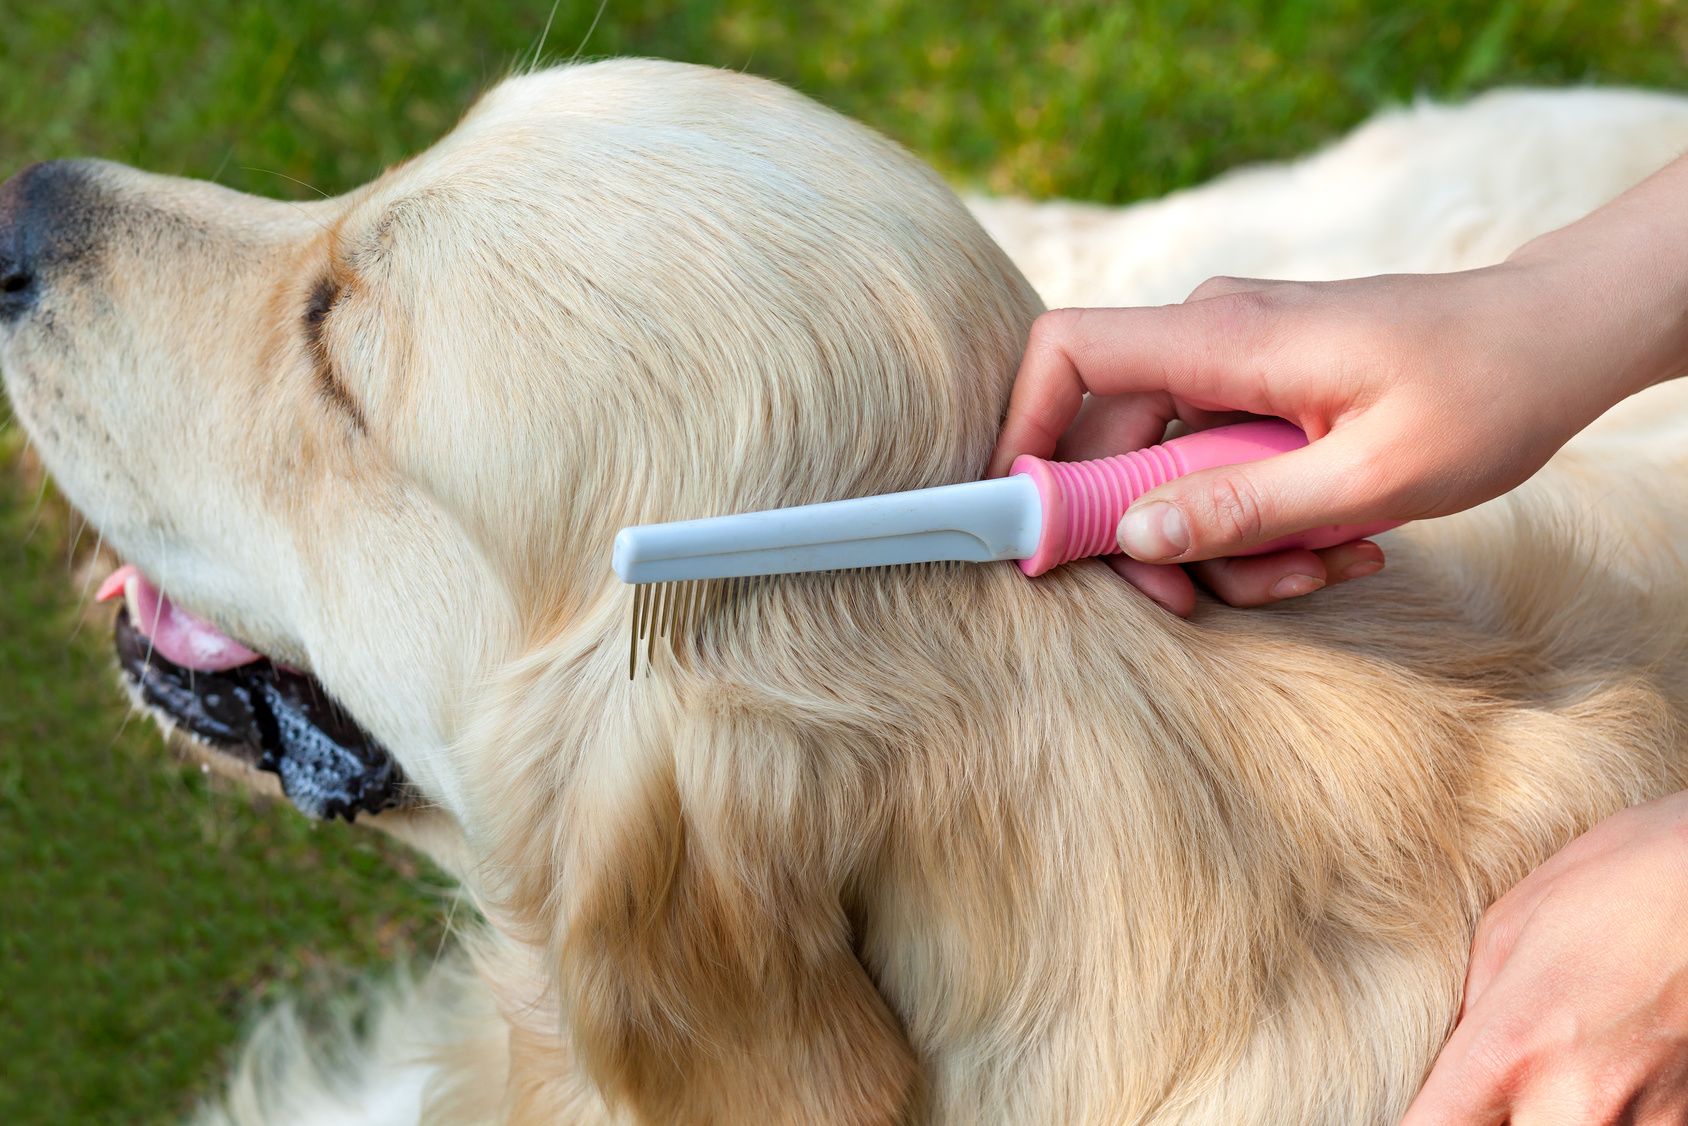 The content of Labrador. Care dog fur outdoors. Human hand brushing fur golden retriever. Human friendship and dogs. Hygienic procedures.